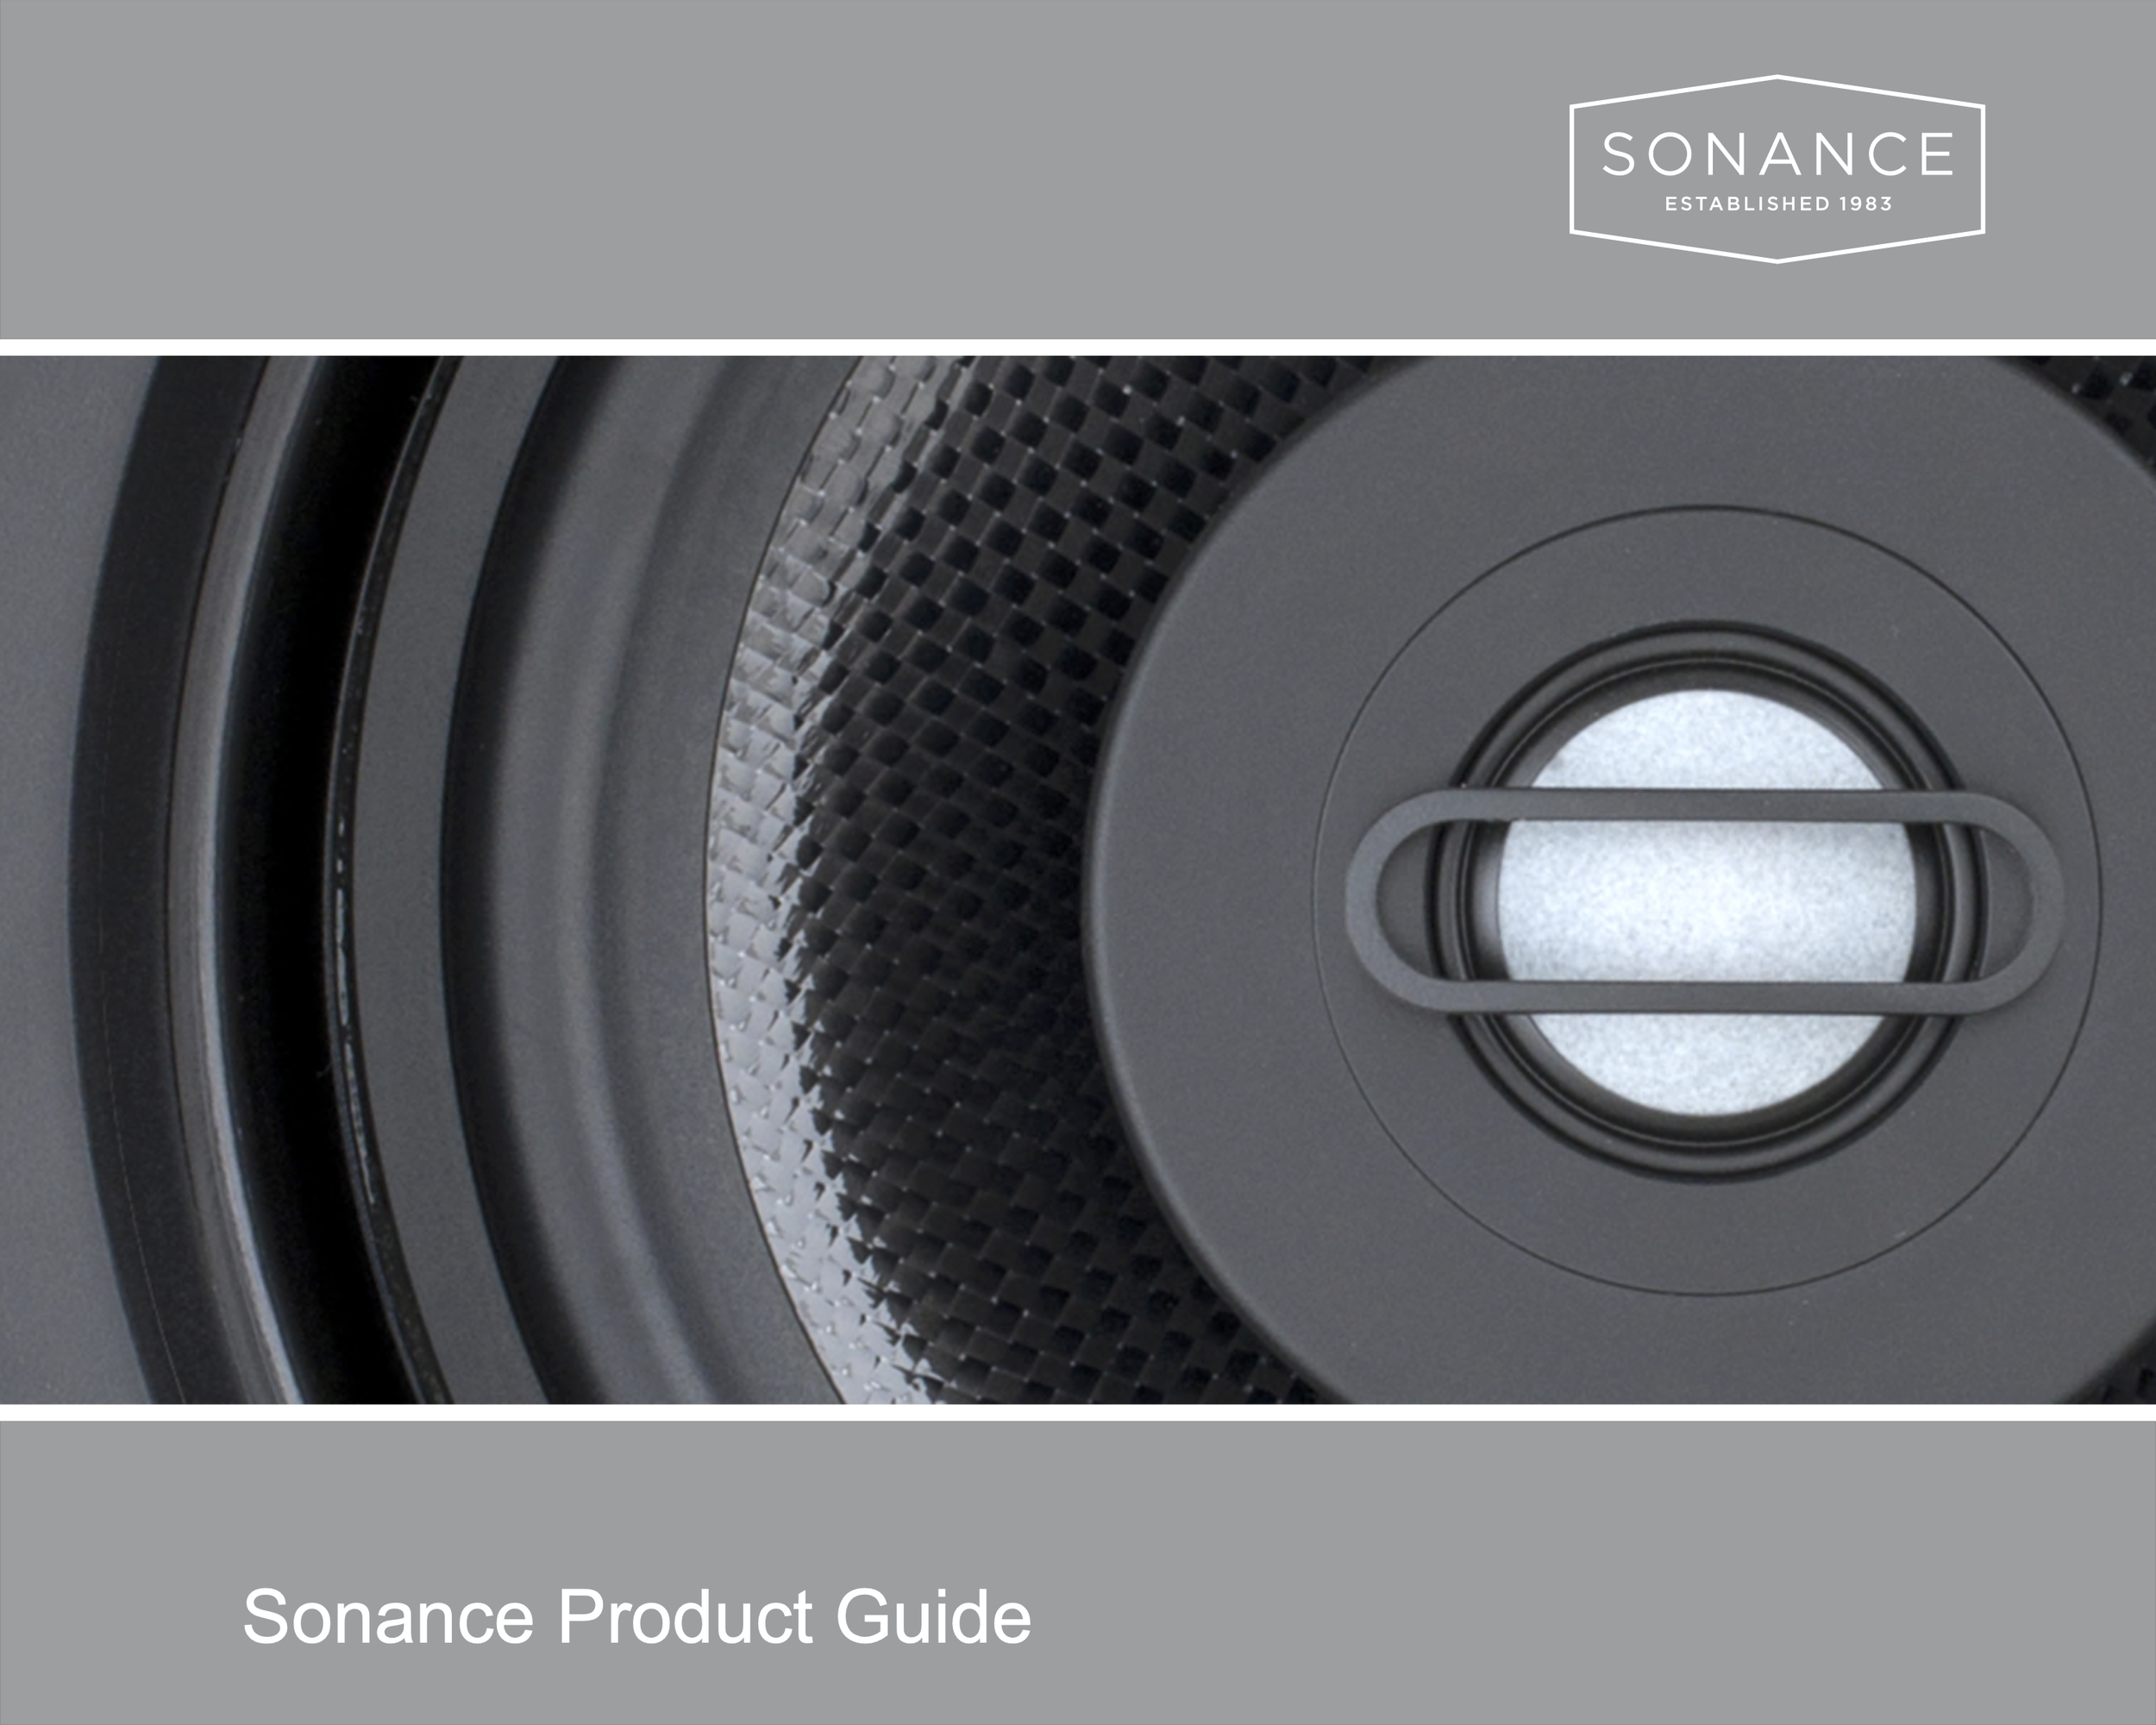 Sonance product guide final Aug 2019.png